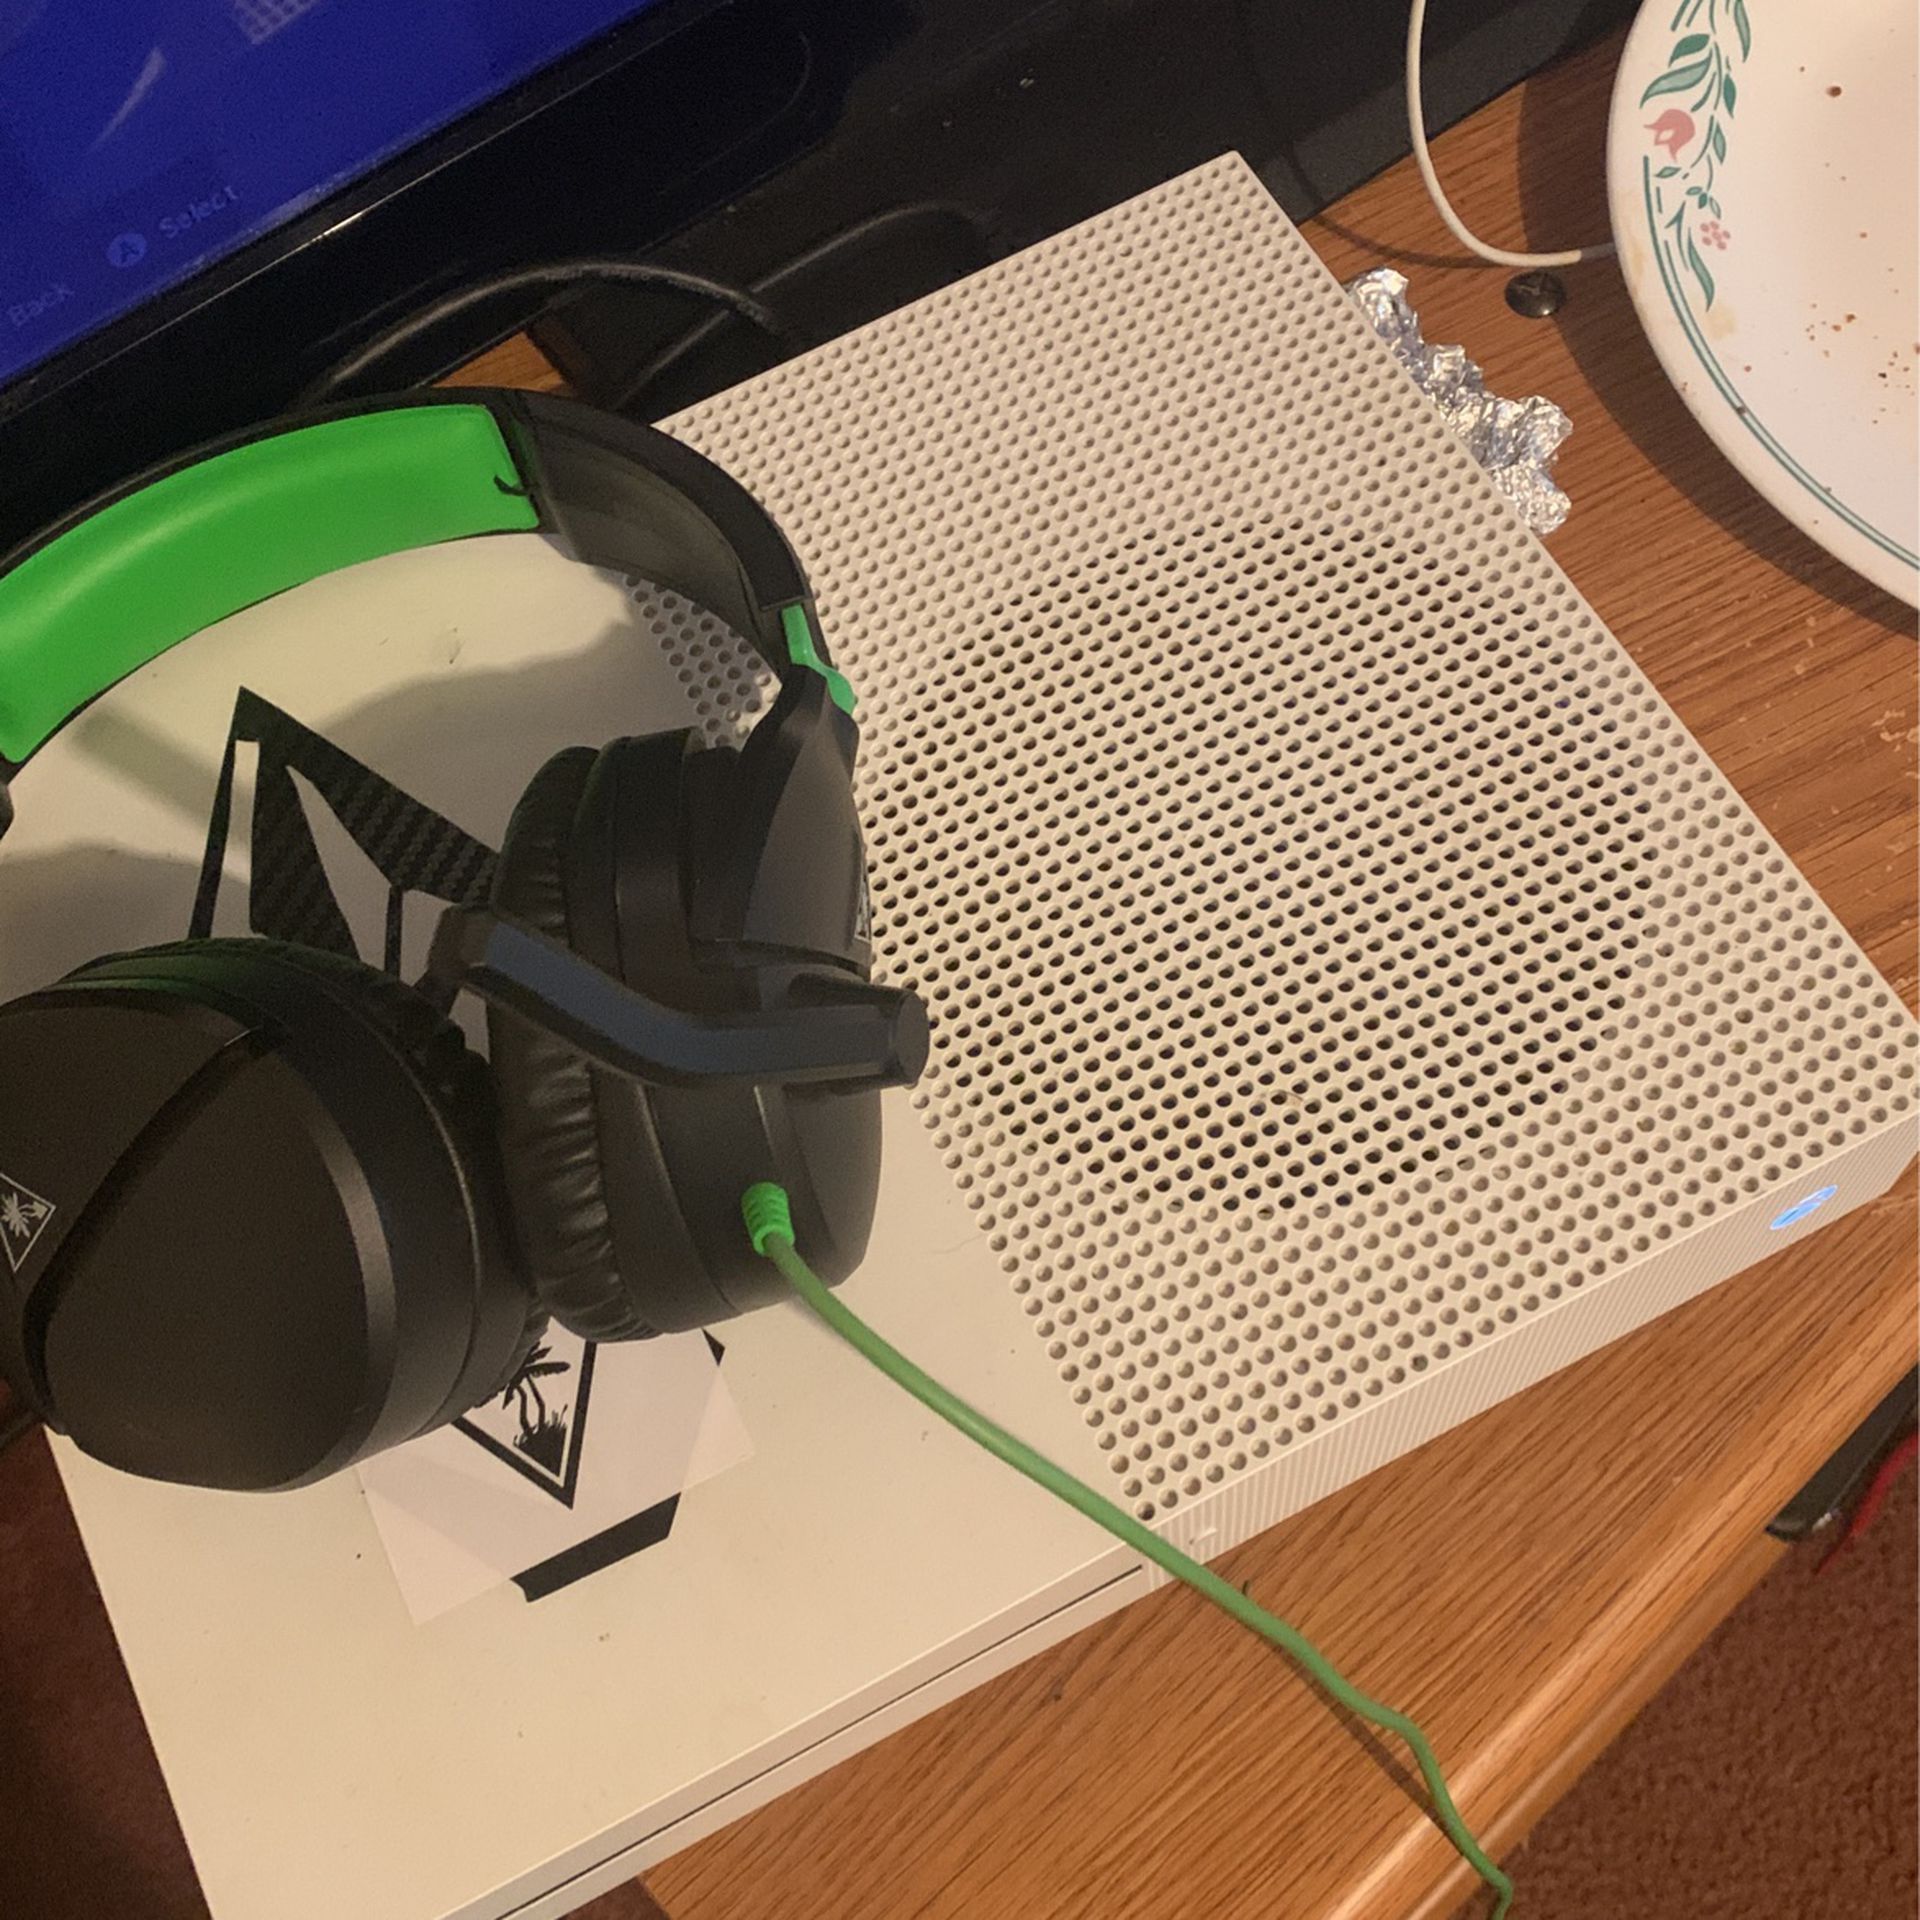 Xbox One S With Turtle Beach Headset And Controller